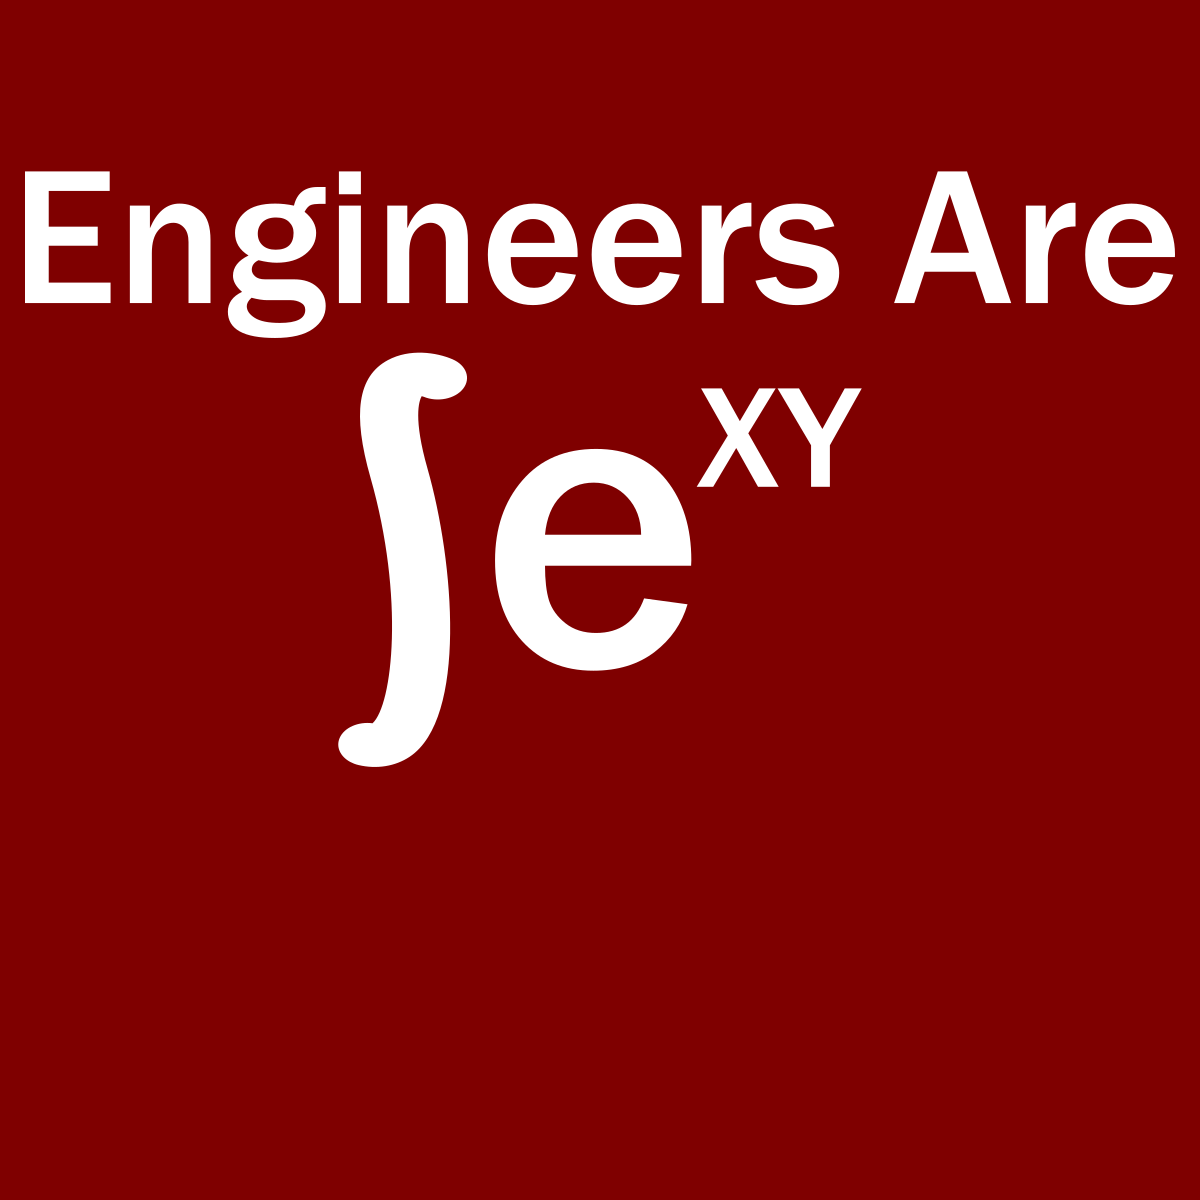 Engineers Are Sexy - Engineering Outfitters